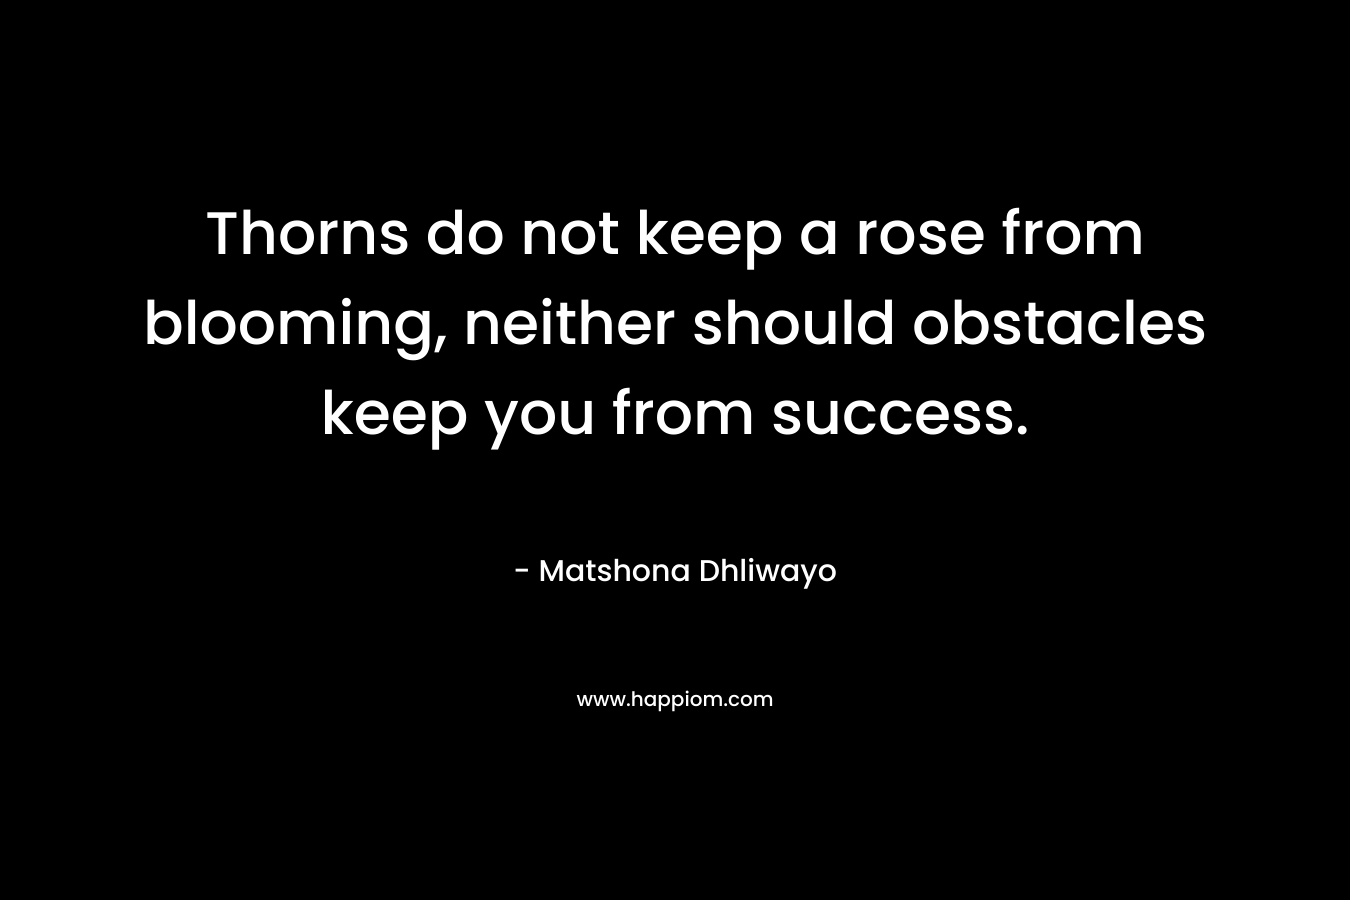 Thorns do not keep a rose from blooming, neither should obstacles keep you from success. – Matshona Dhliwayo